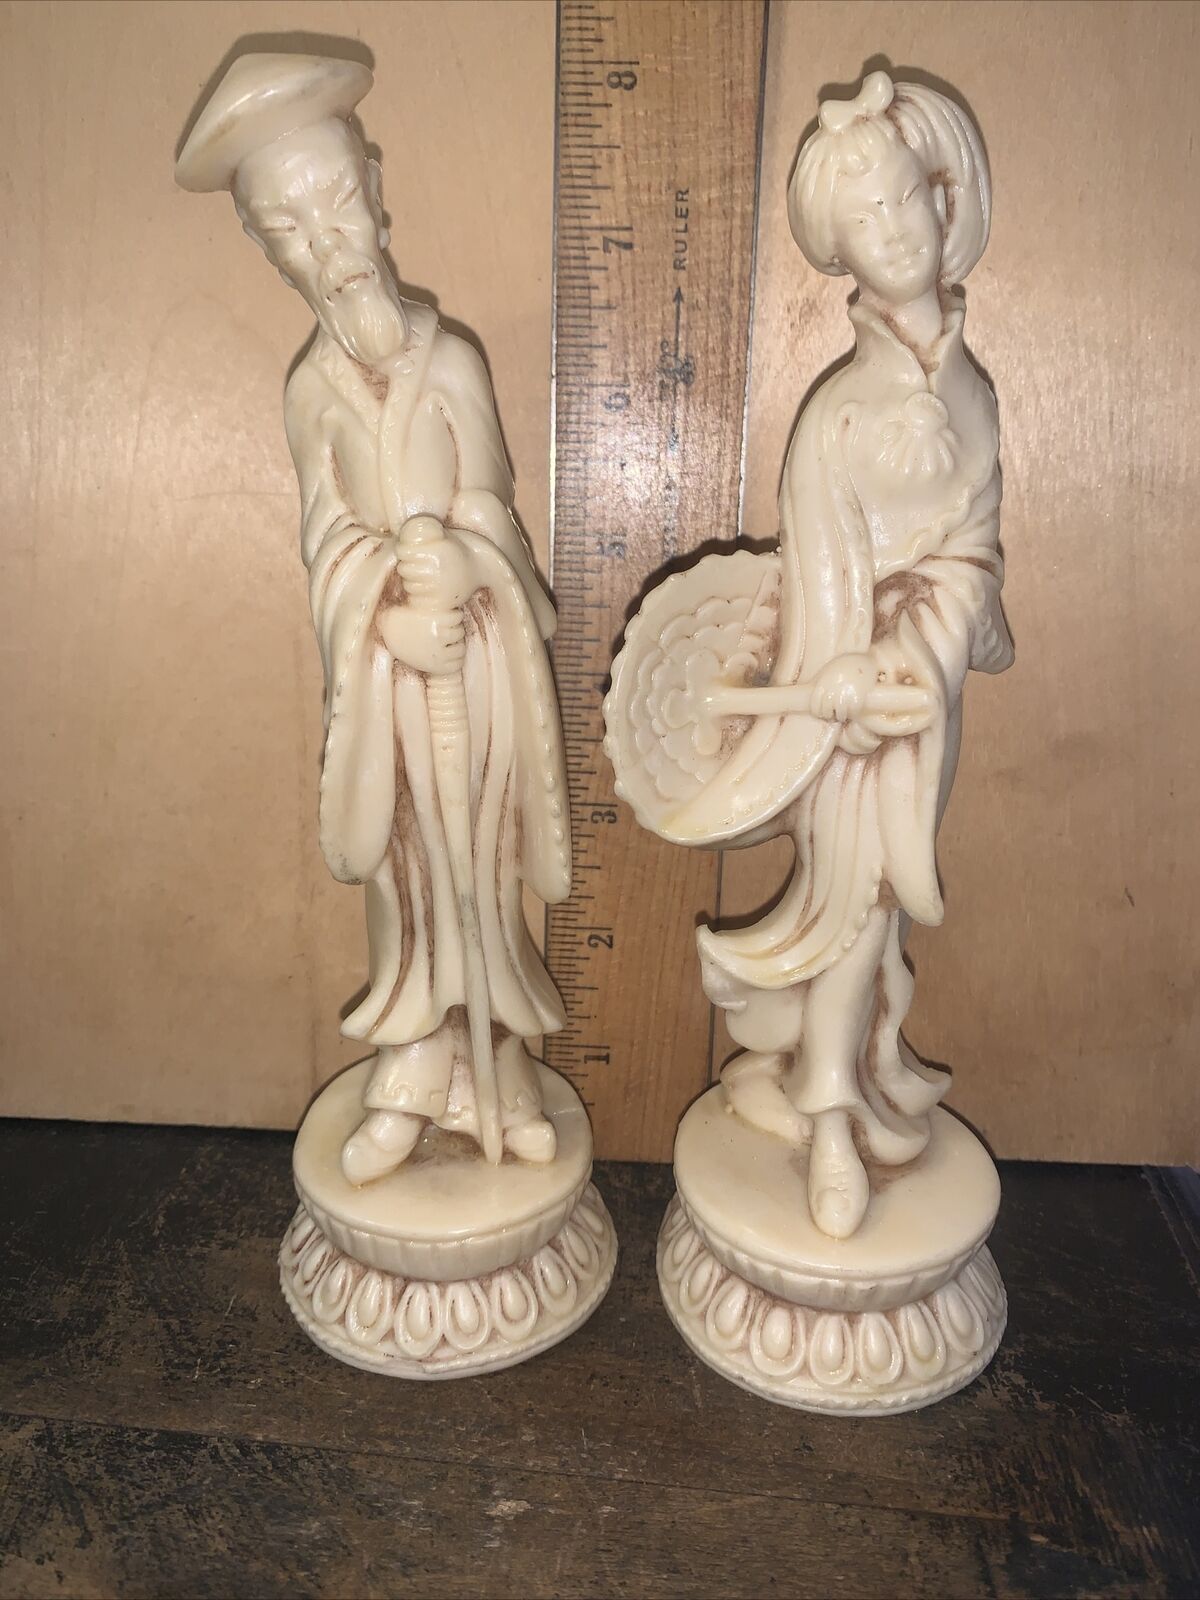 2 Toscany Asian Themed ￼Figures Made In Italy. Wise Man & Young Woman.